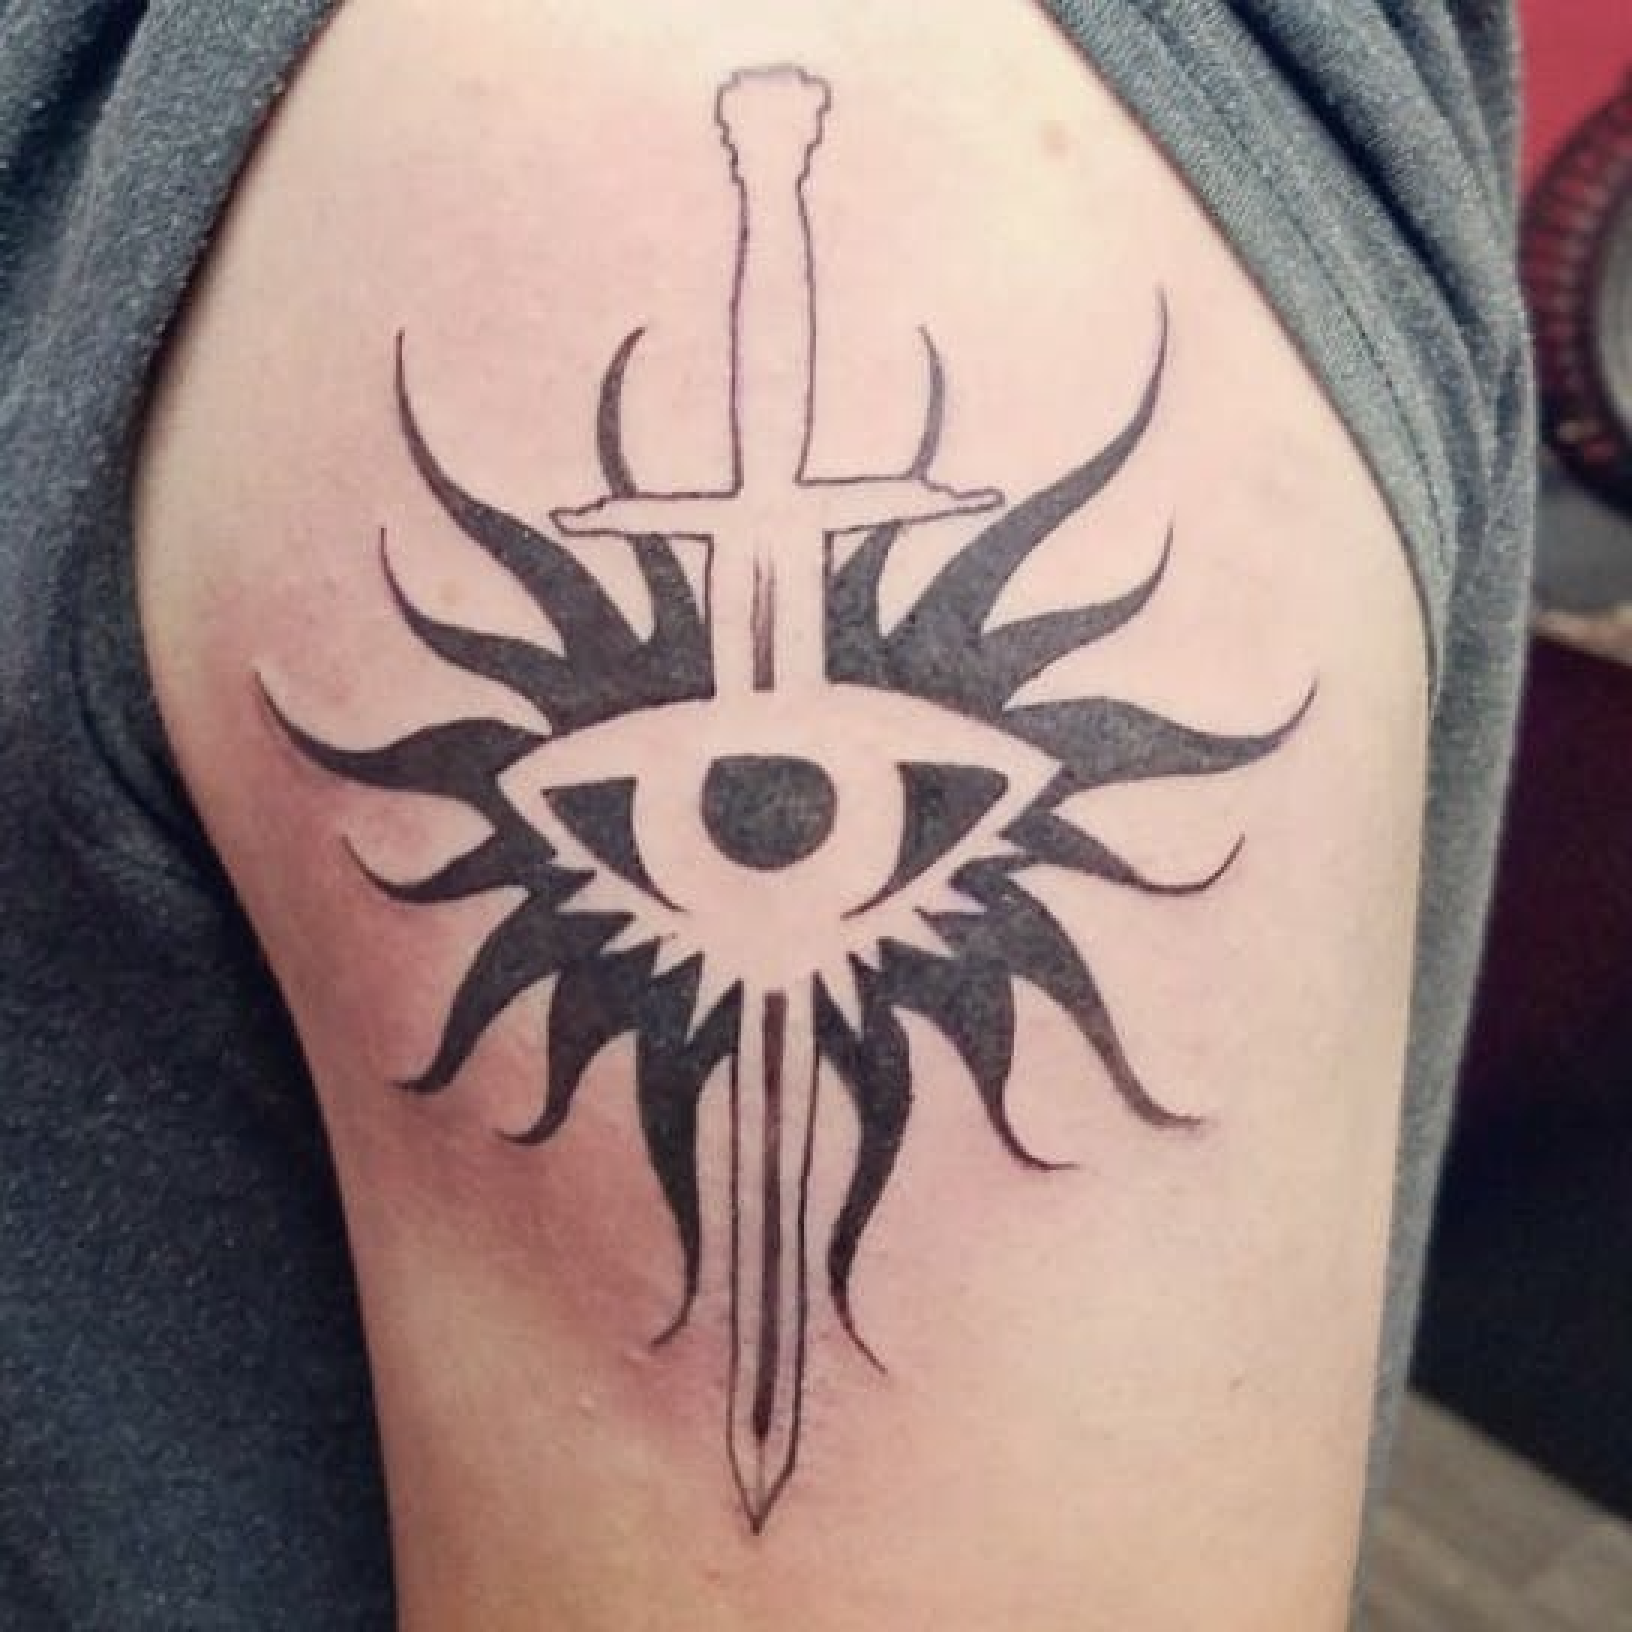 101+ Best Gaming Tattoos You Haven't Seen Before!